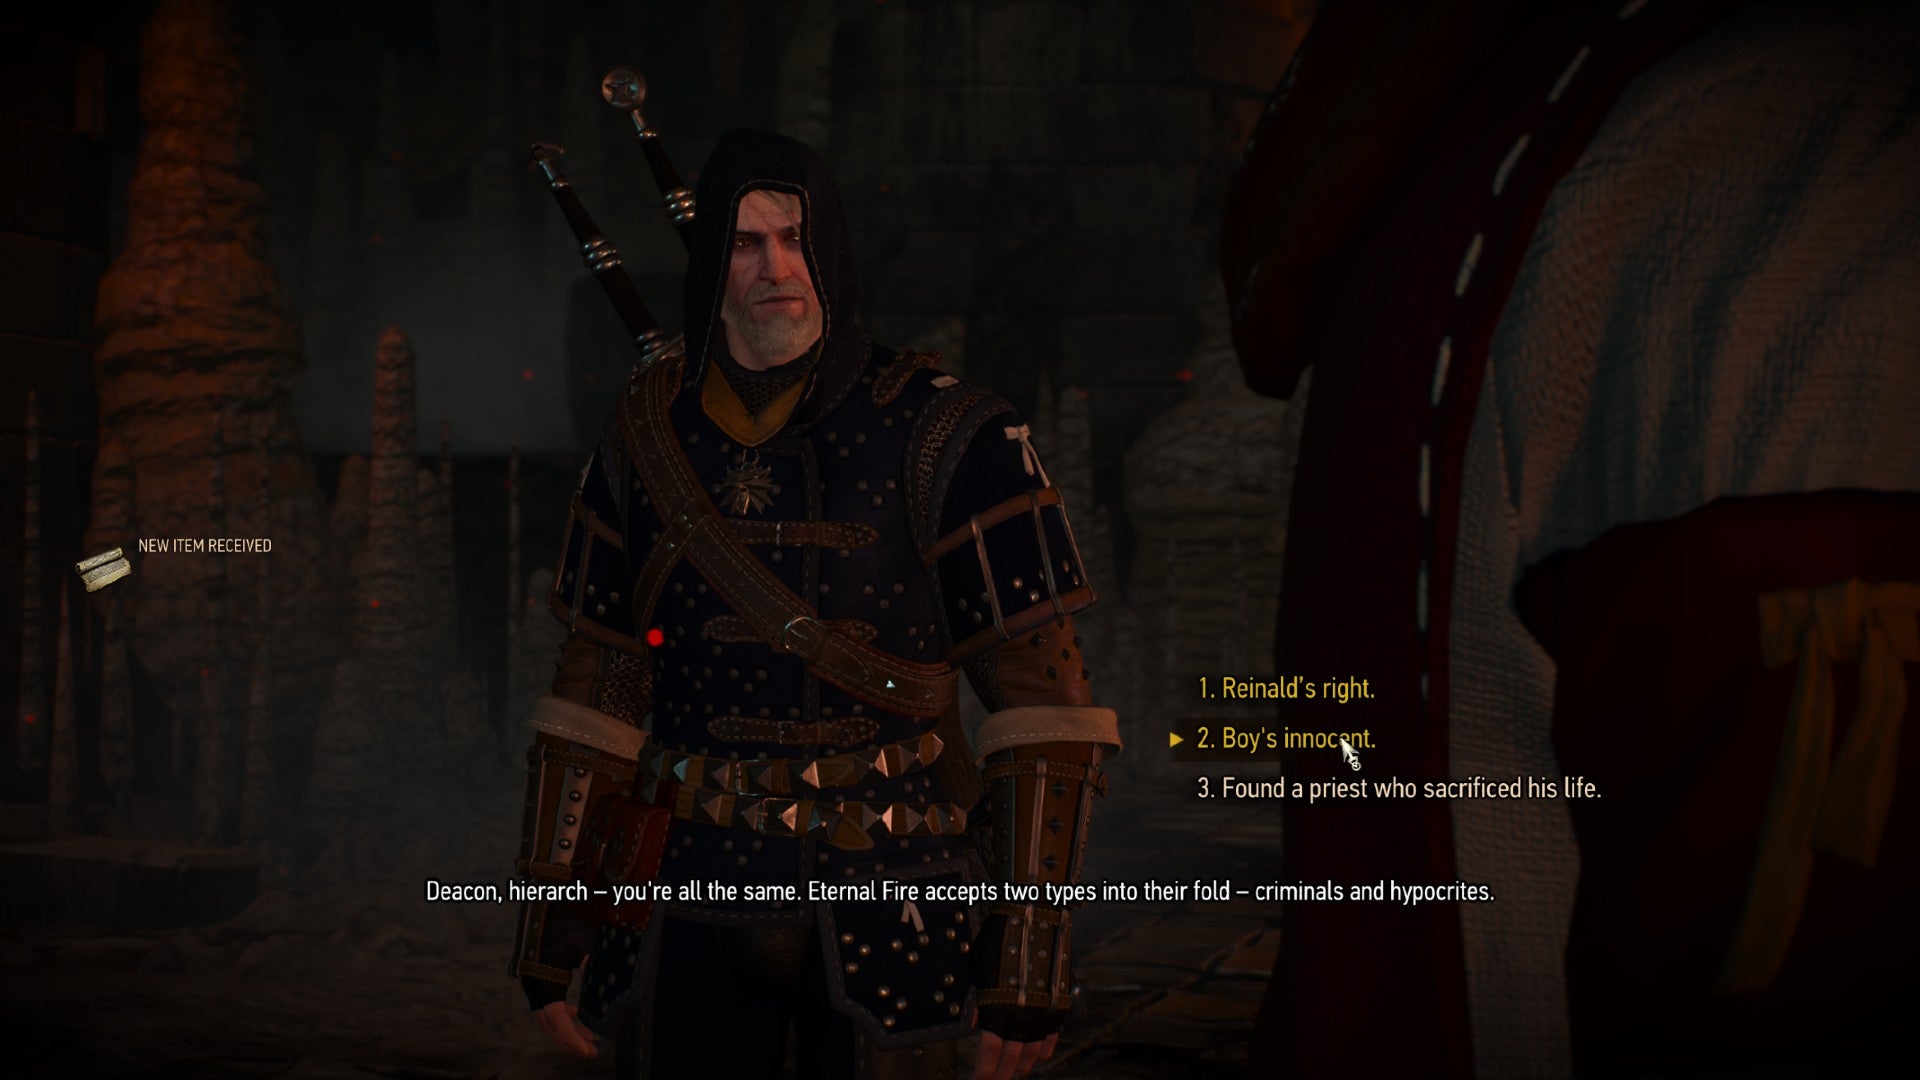 Witcher 3 screenshot showing the "Boy's Innocent" dialogue option.